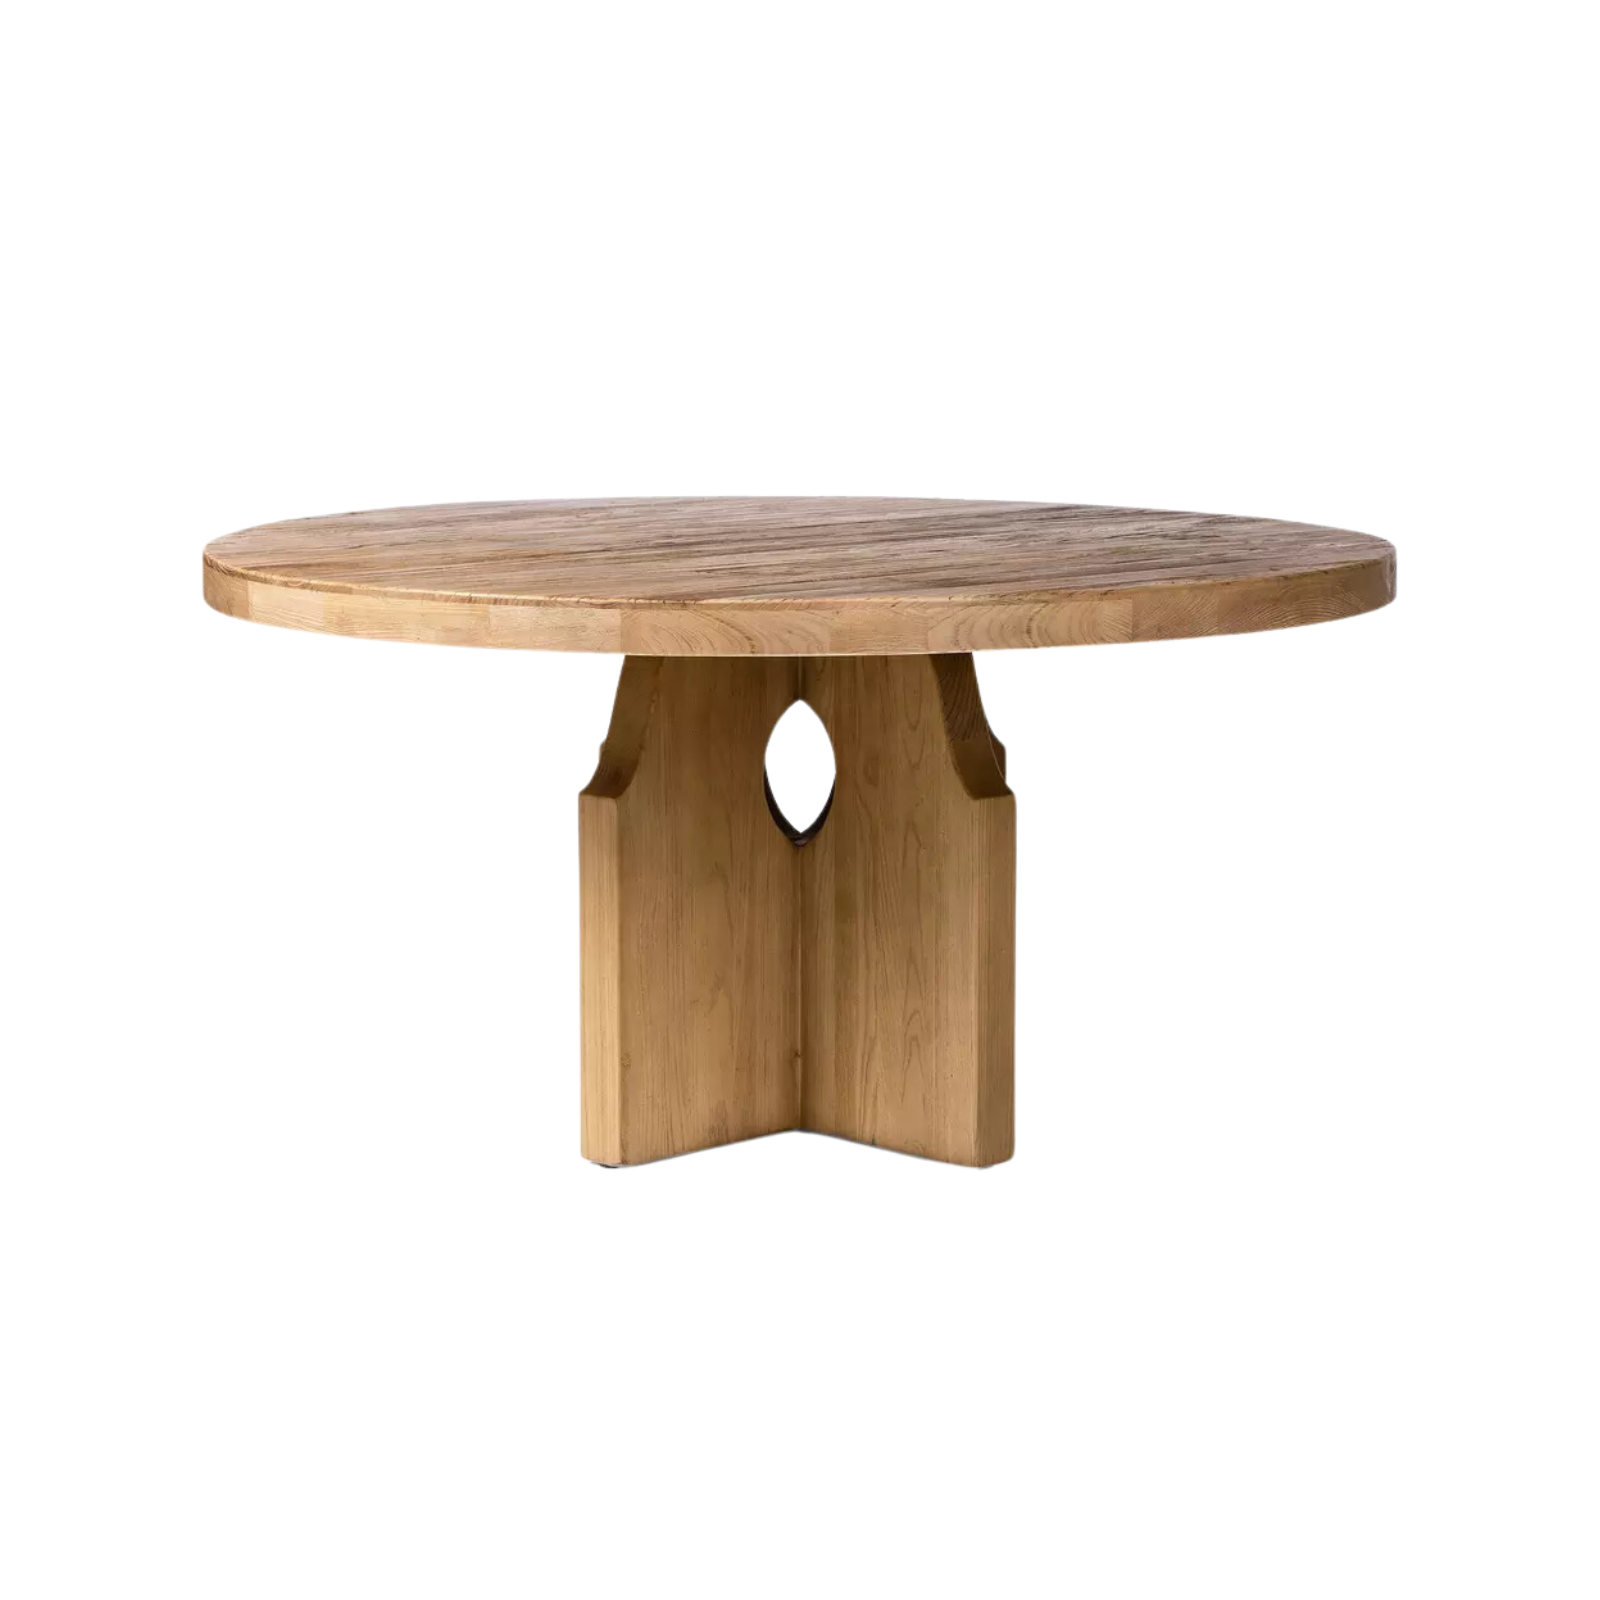 Allan Round Dining Table